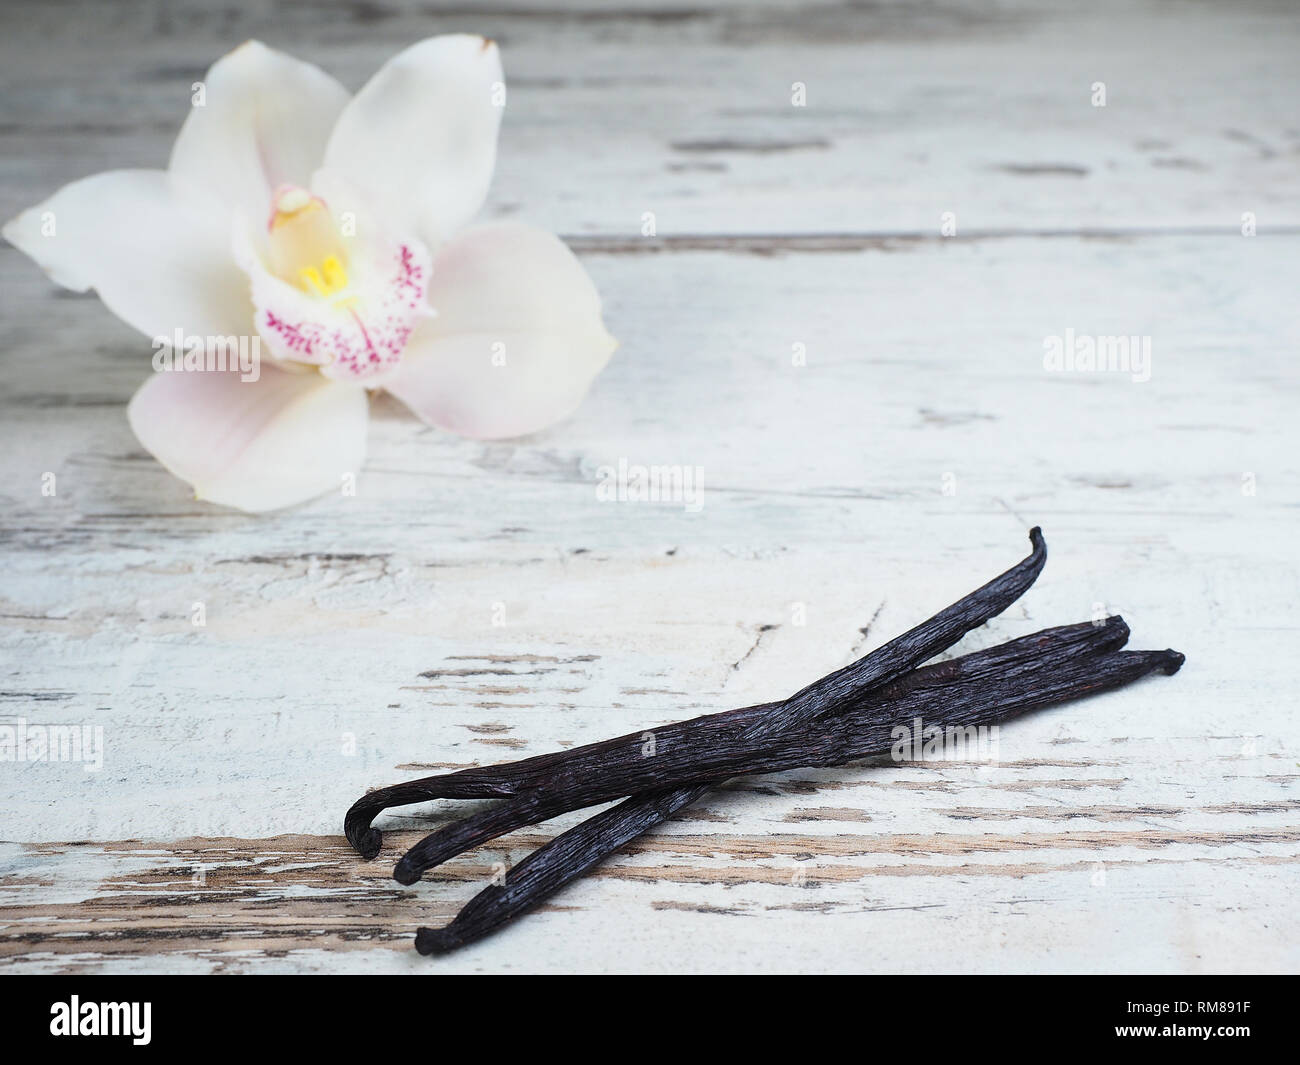 Dried vanilla fruits and orchid vanilla flower Stock Photo